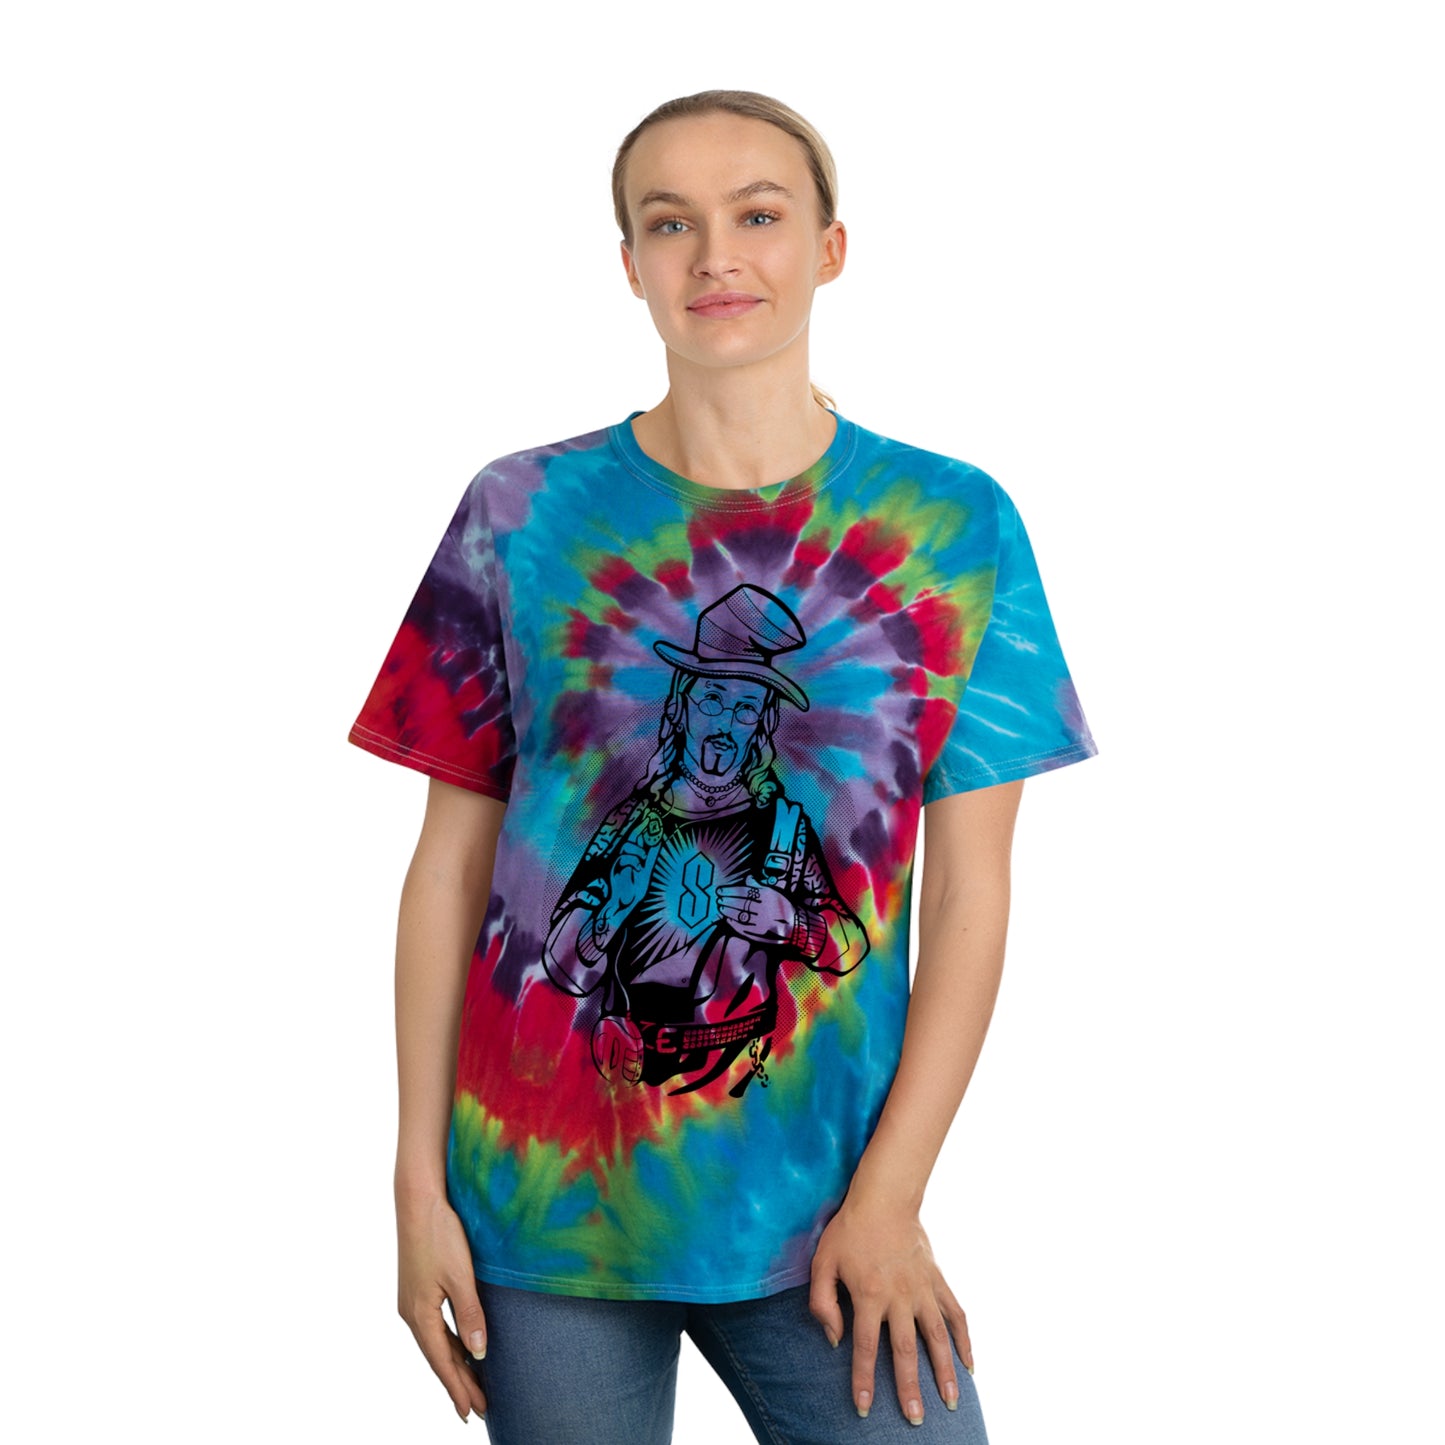 Jesus Is All That and a Bag of Chips tie-dye t-shirt